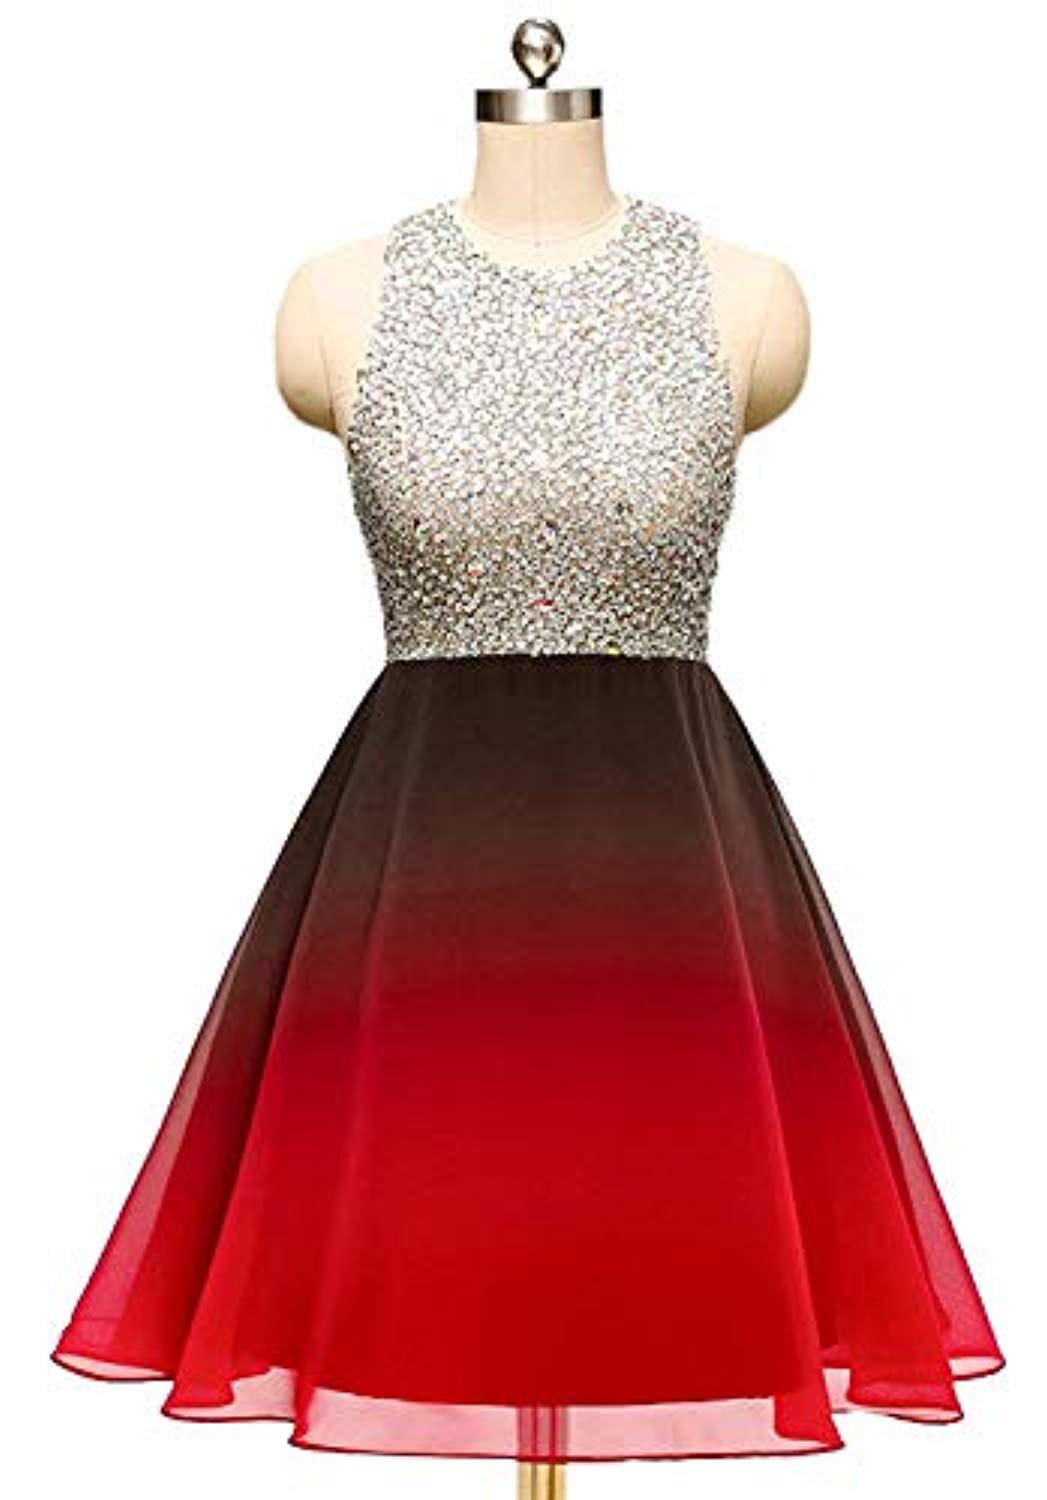 Luxury Beaded Crystal Gradient Short Homecoming Dress Scoop Neck Mini Cocktail Party Gowns ,above Length Junior Party Gowns